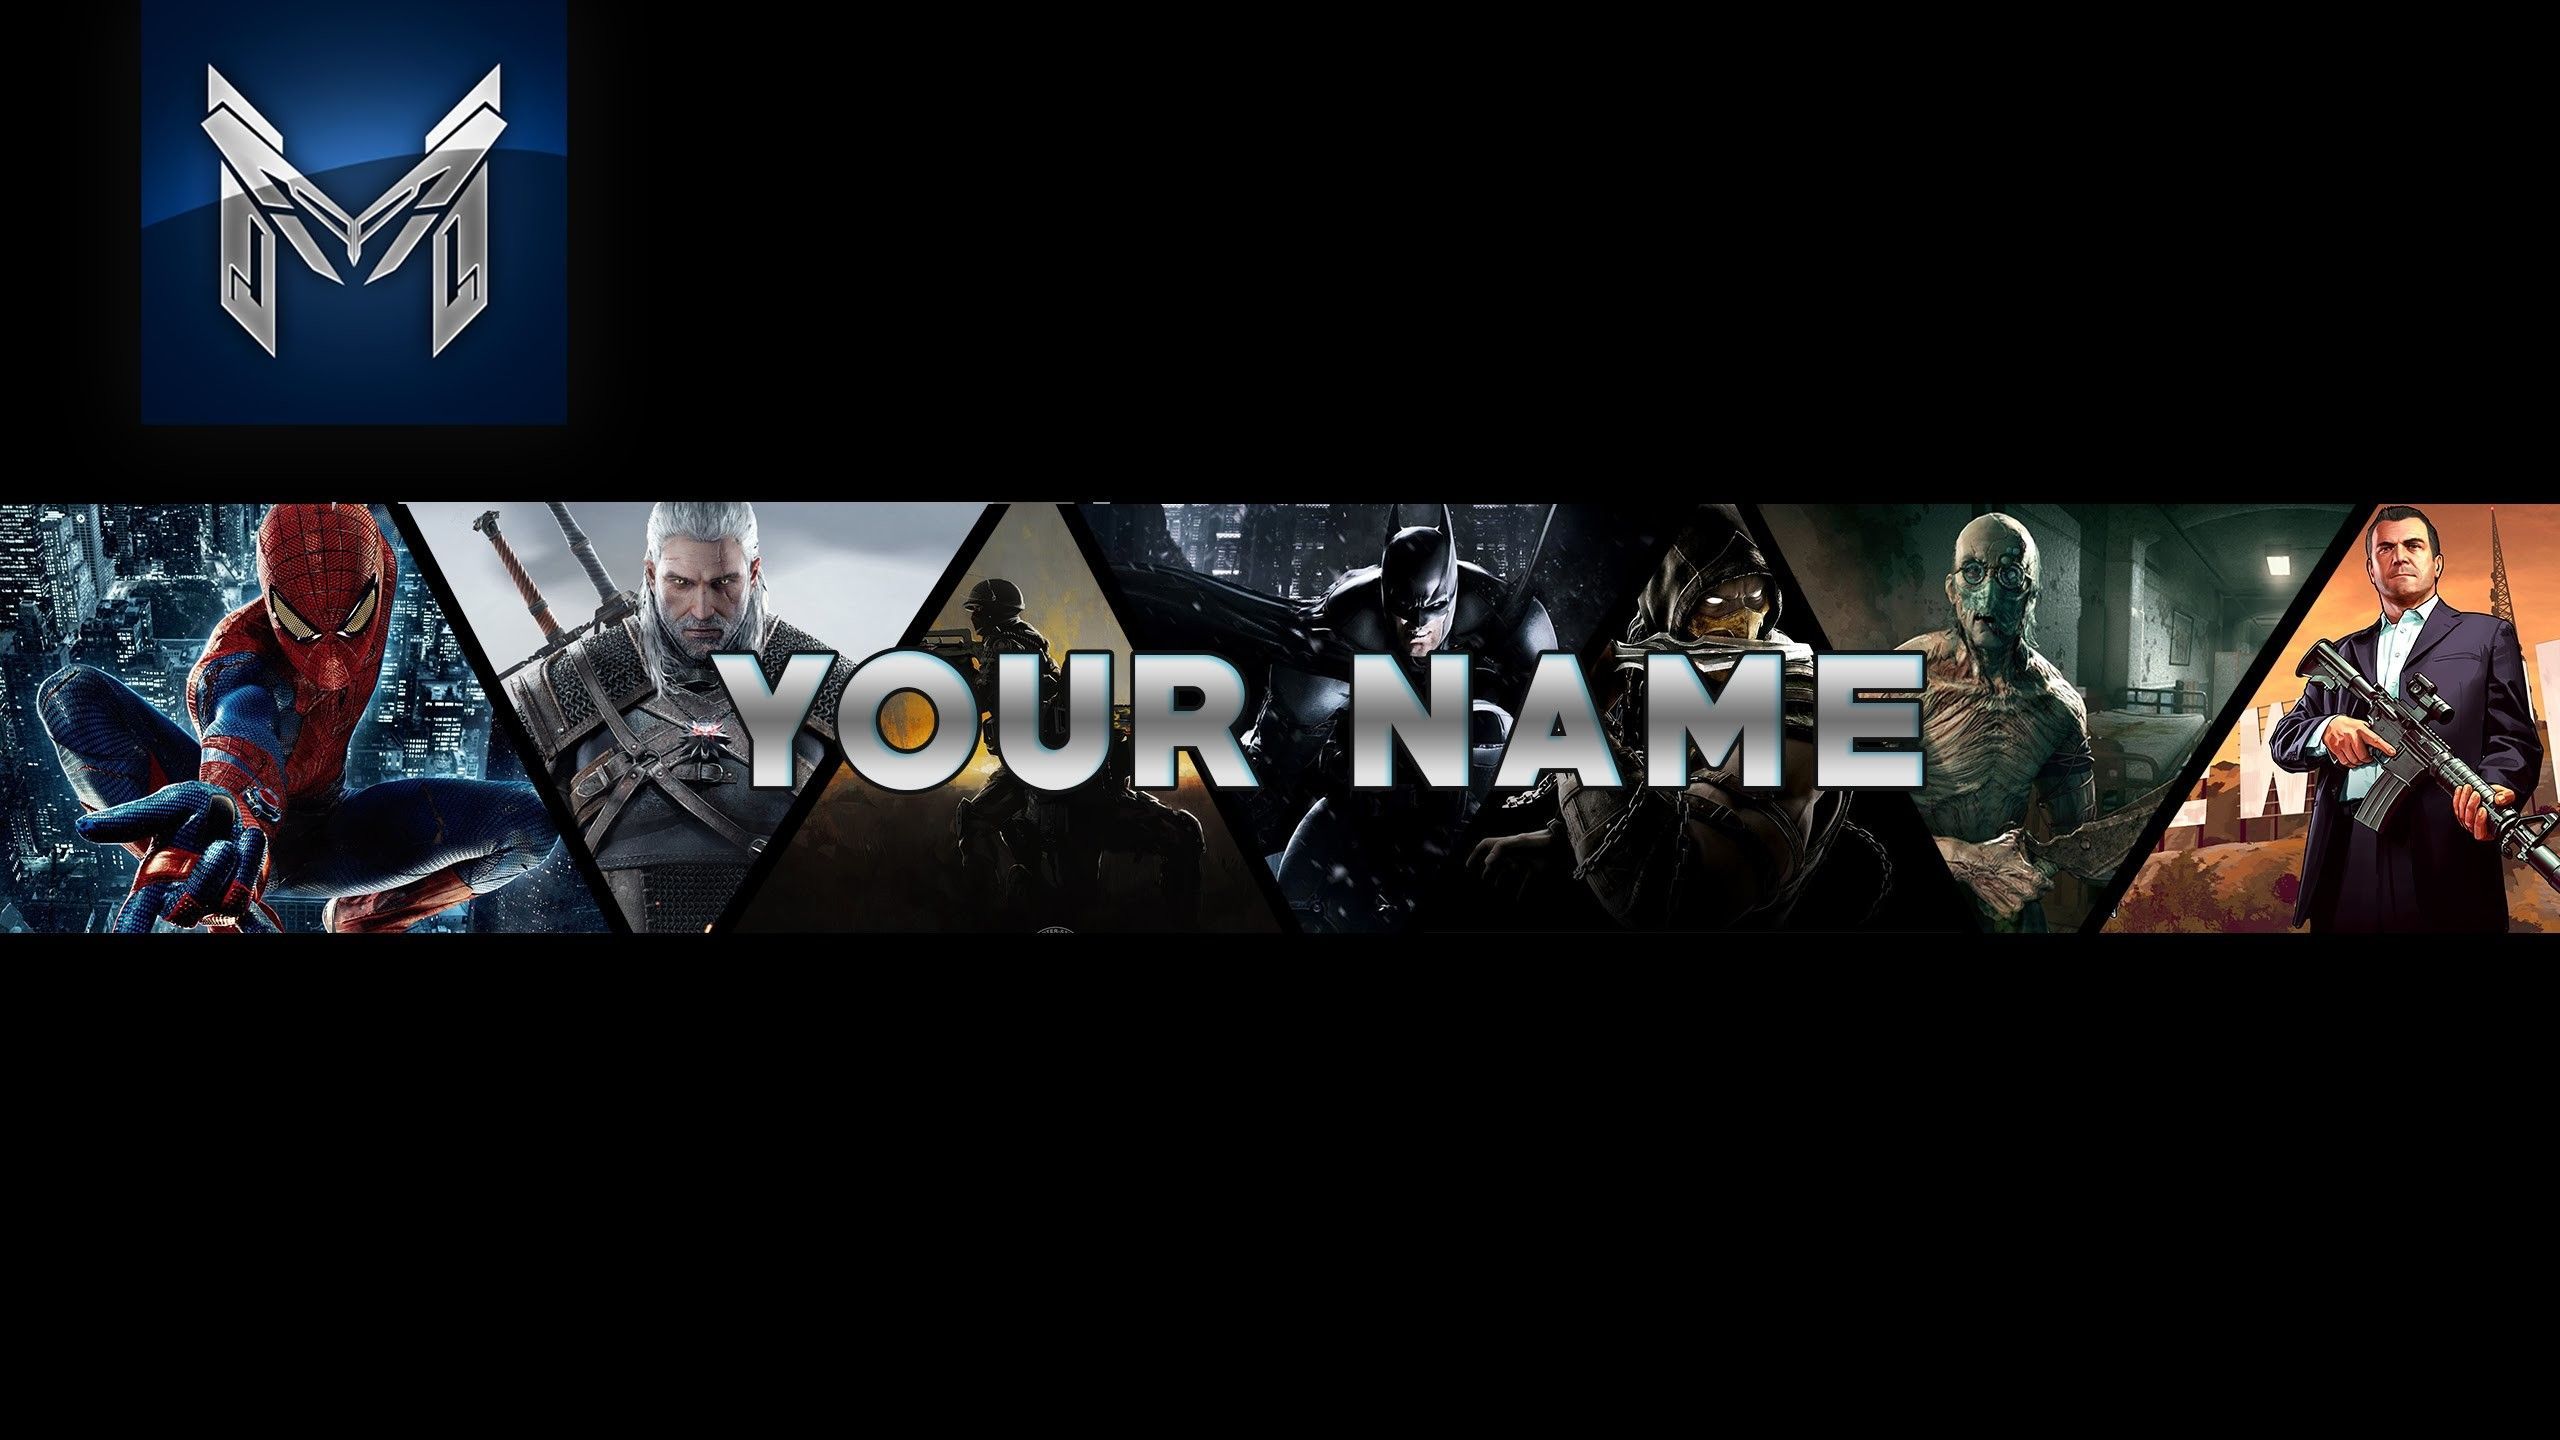 Res: 2560x gaming wallpaper banner. Youtube banners, Banner photohop, Gaming wallpaper